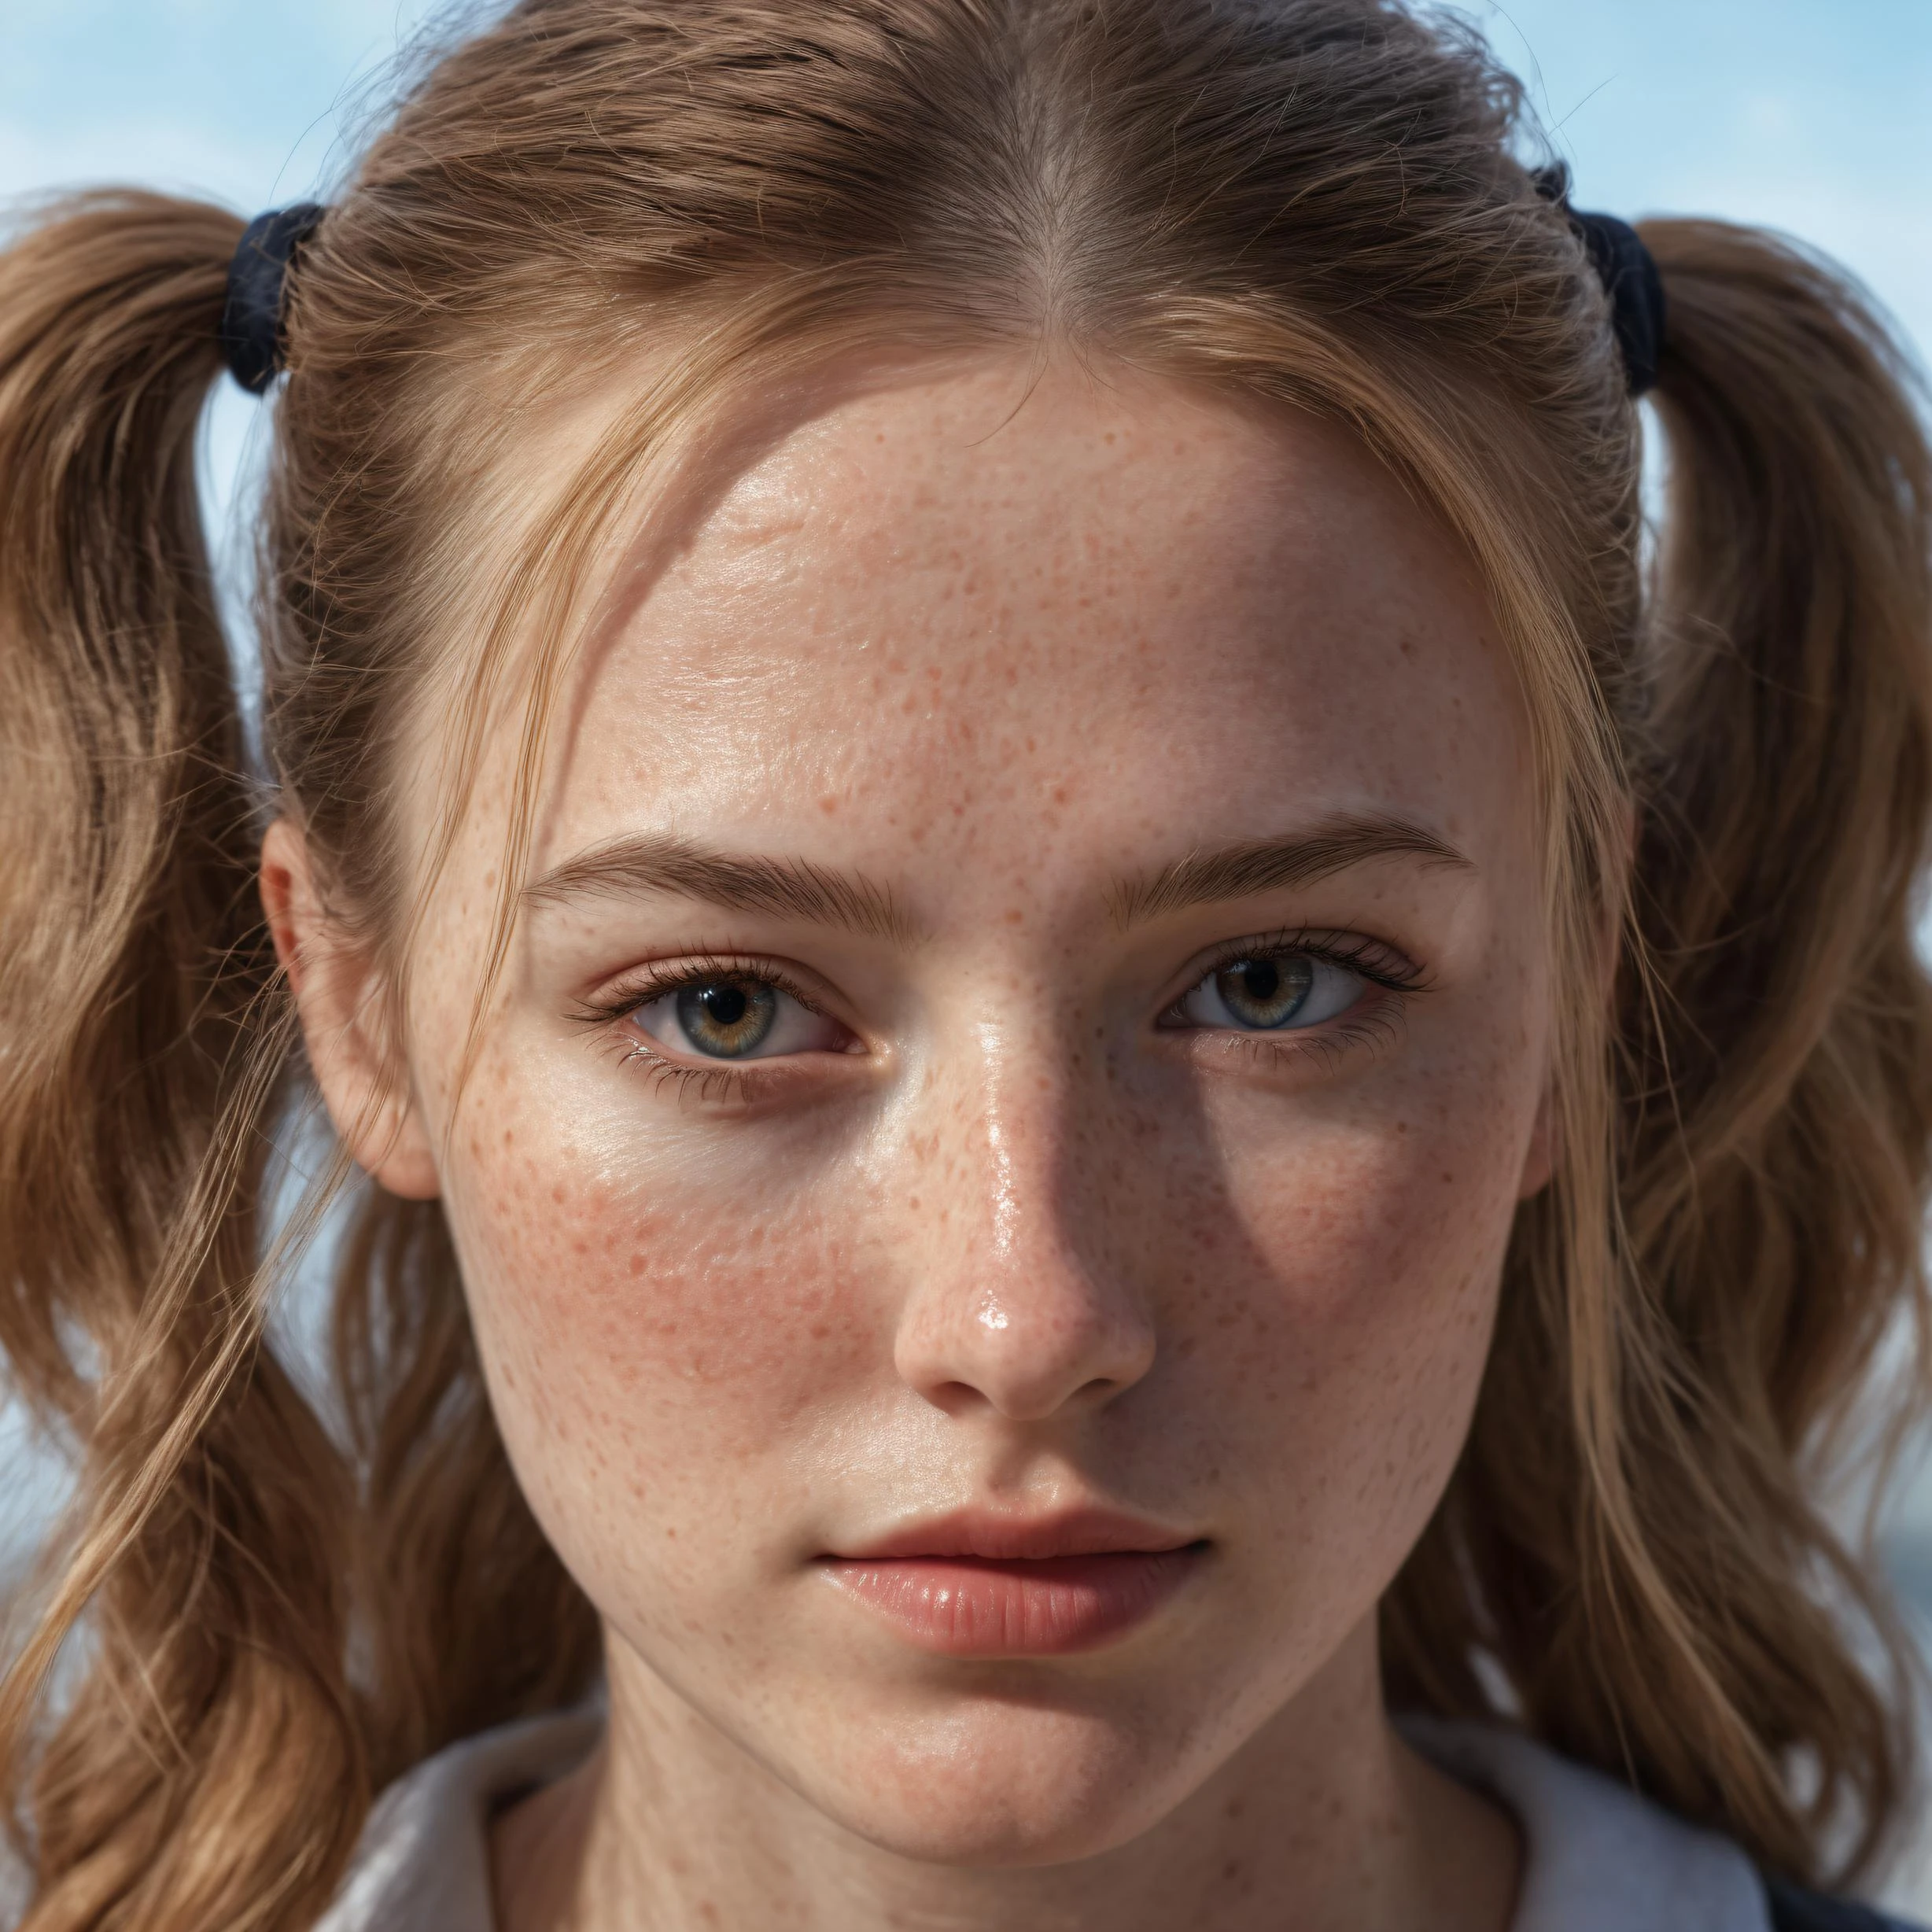 realistic upclose photo of skin showing all the small details,  8k,  ((detailed skin)), natural skin, skin pores, skin hair, realistic skin texture, skin imperfections, freckled, hyperdetailed, natural lighting, 4k, hdr, uhd, masterpiece, (sharp focus:1.4), intricate, fine details.
, Alexis from Belgium, medium (chin-length:1.2) pigtails dirty-blonde hair